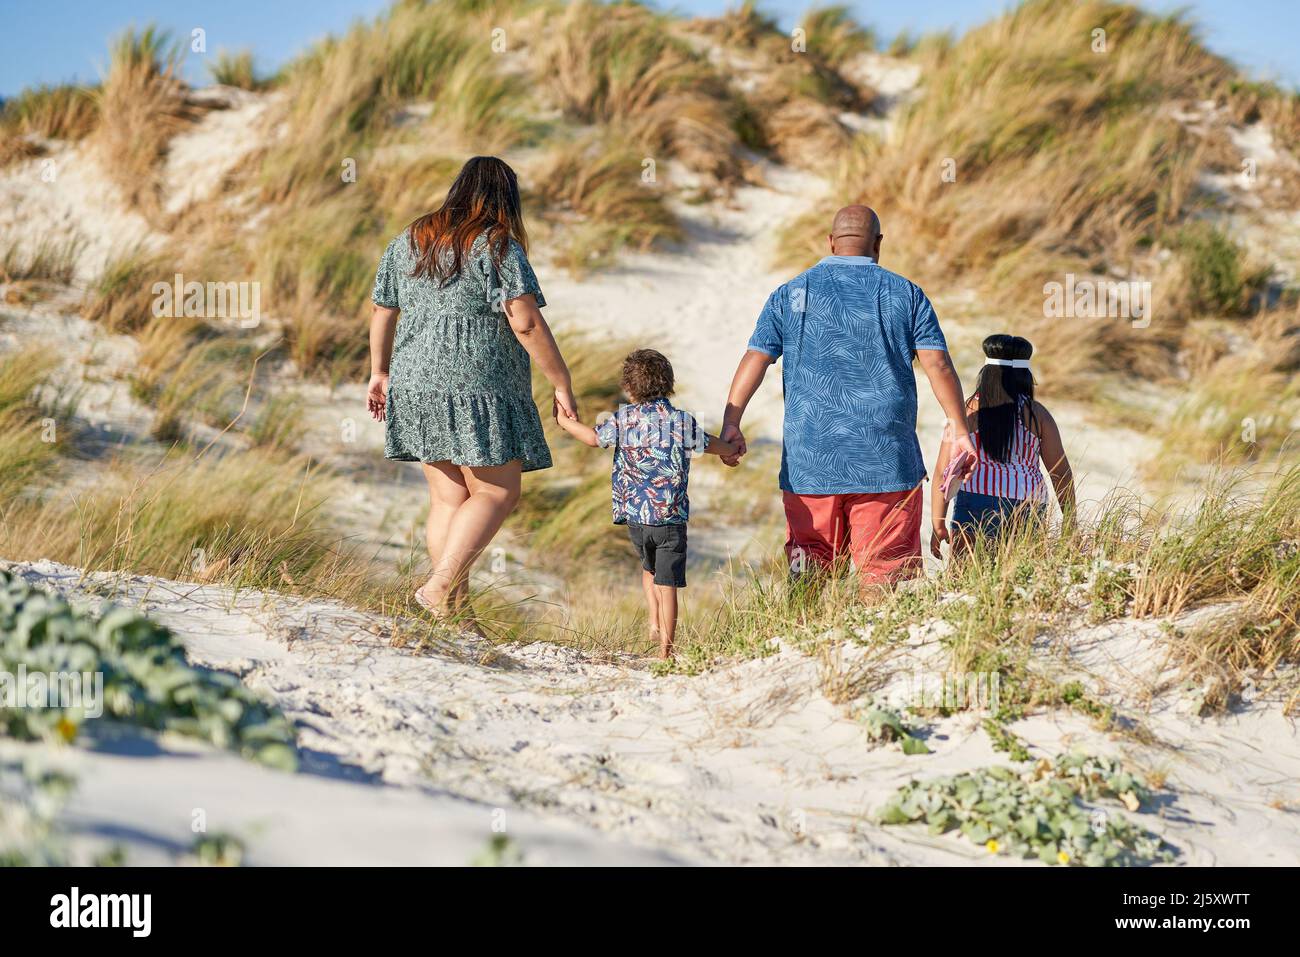 Family holding hands and walking on sandy beach path Stock Photo